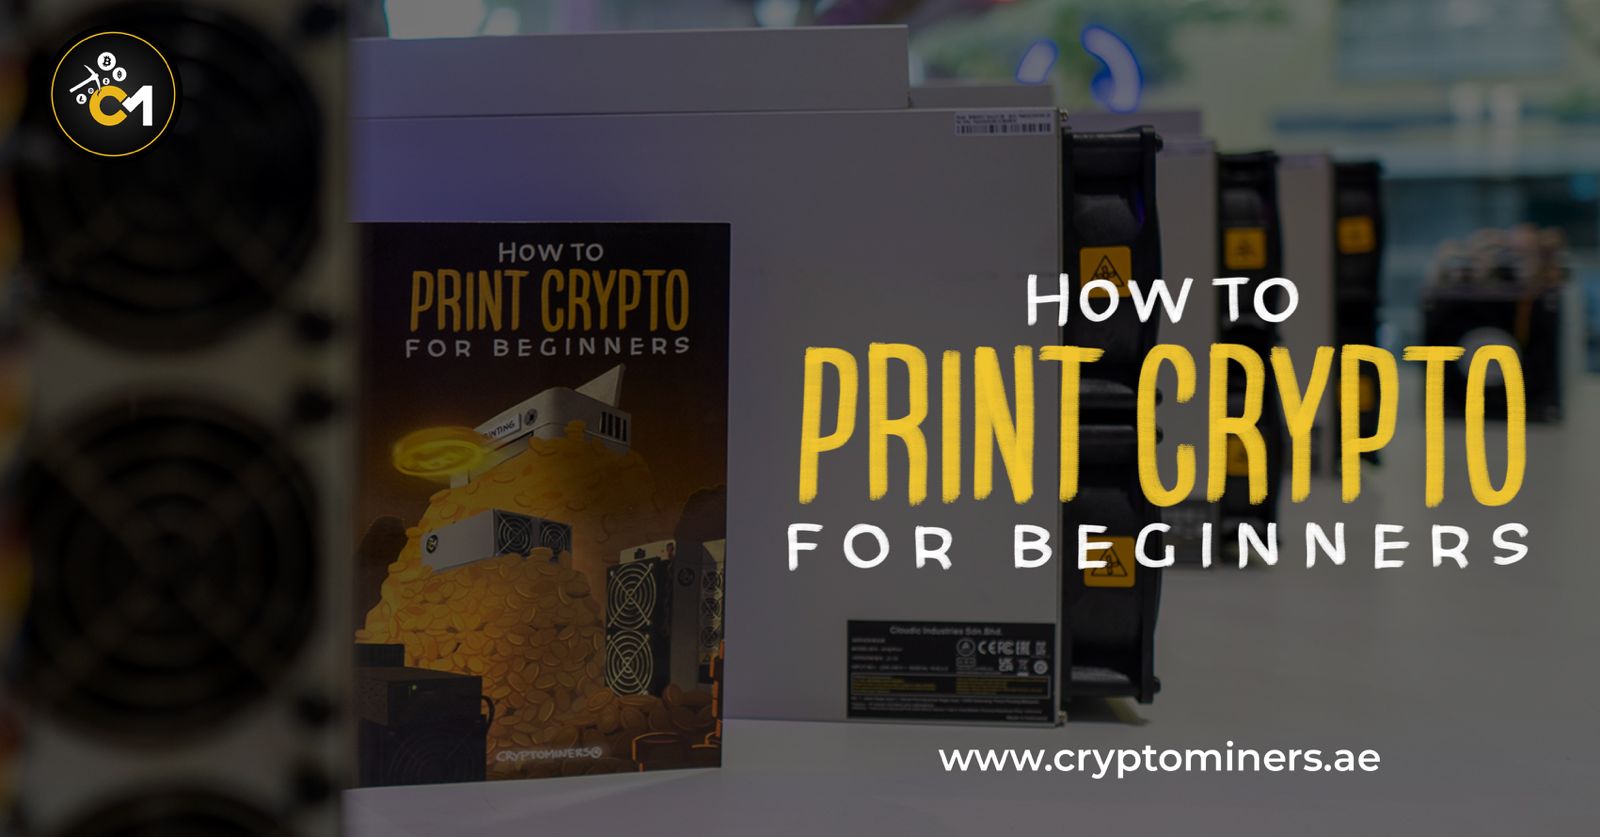 How to Print Crypto for Beginners - Crypto Miners Guide to Crypto Mining